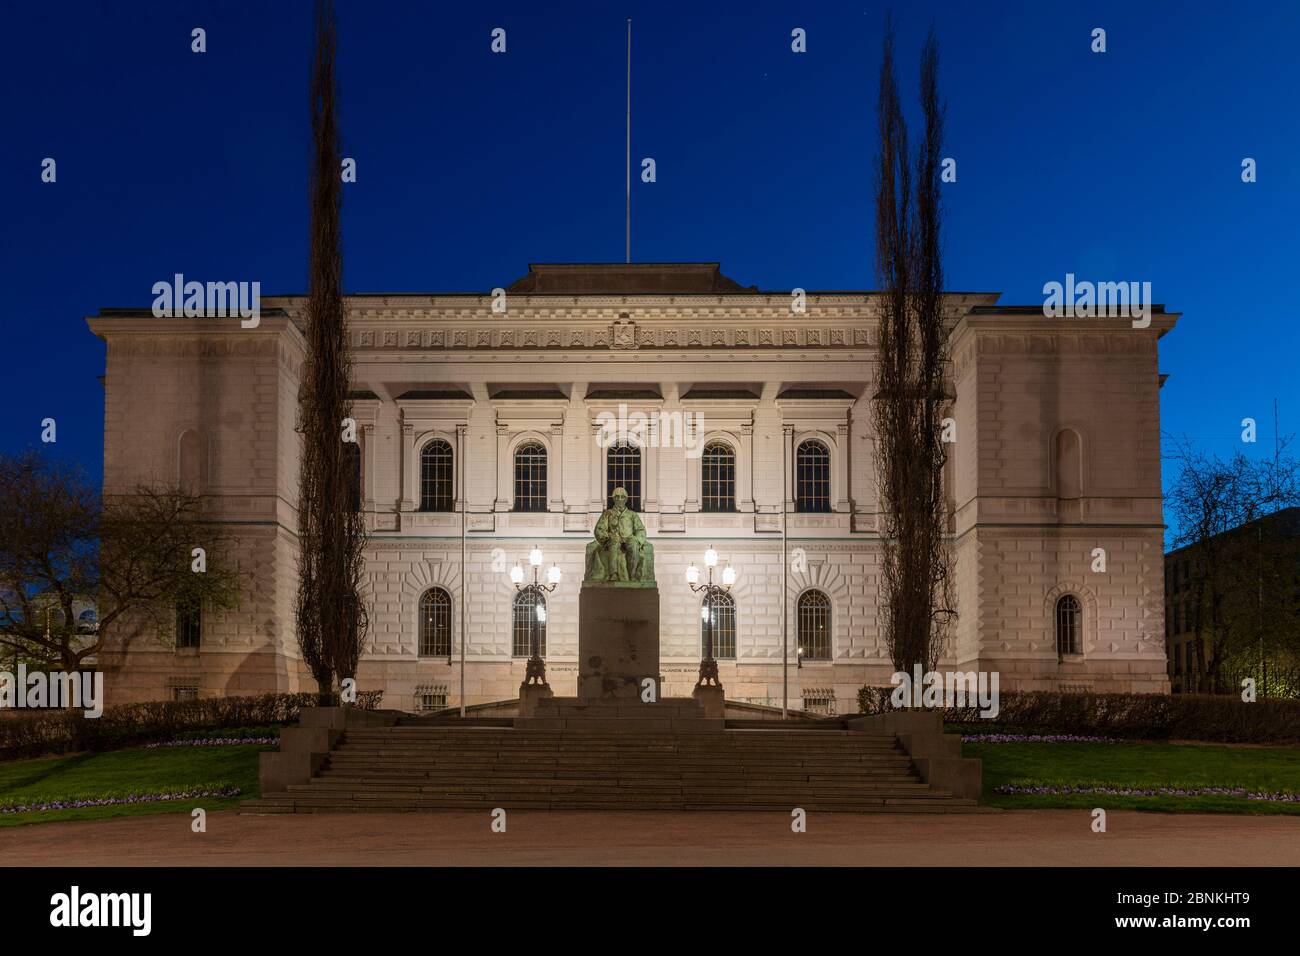 Bank of Finland is the central bank of Finland. It's fourth oldest central bank in the world and located in historical building in Helsinki, Finland. Stock Photo